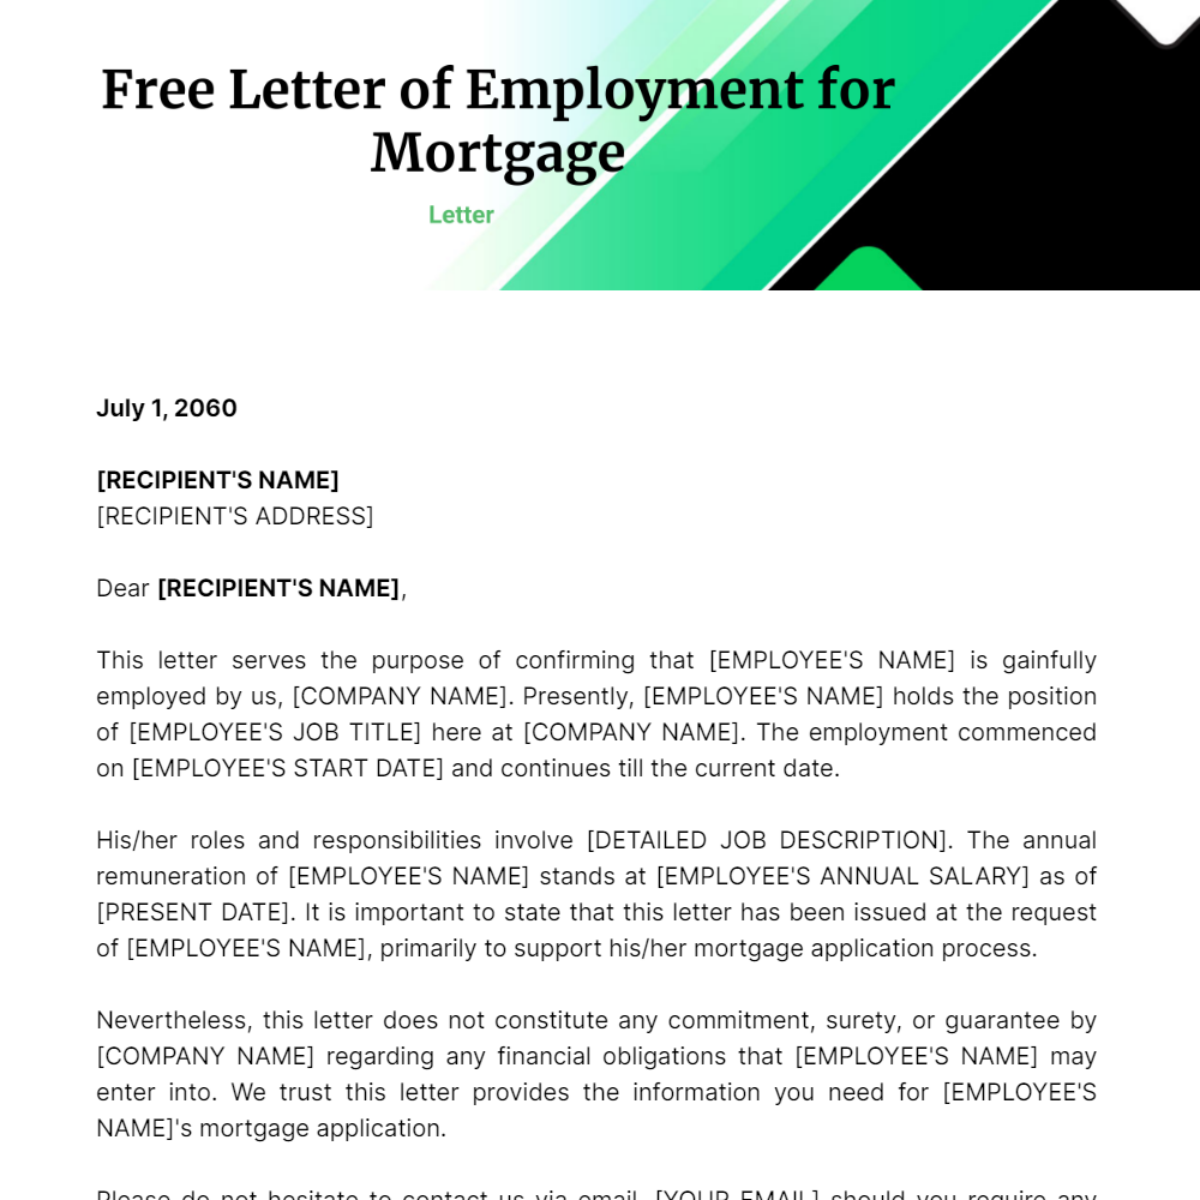 Letter of Employment for Mortgage Template